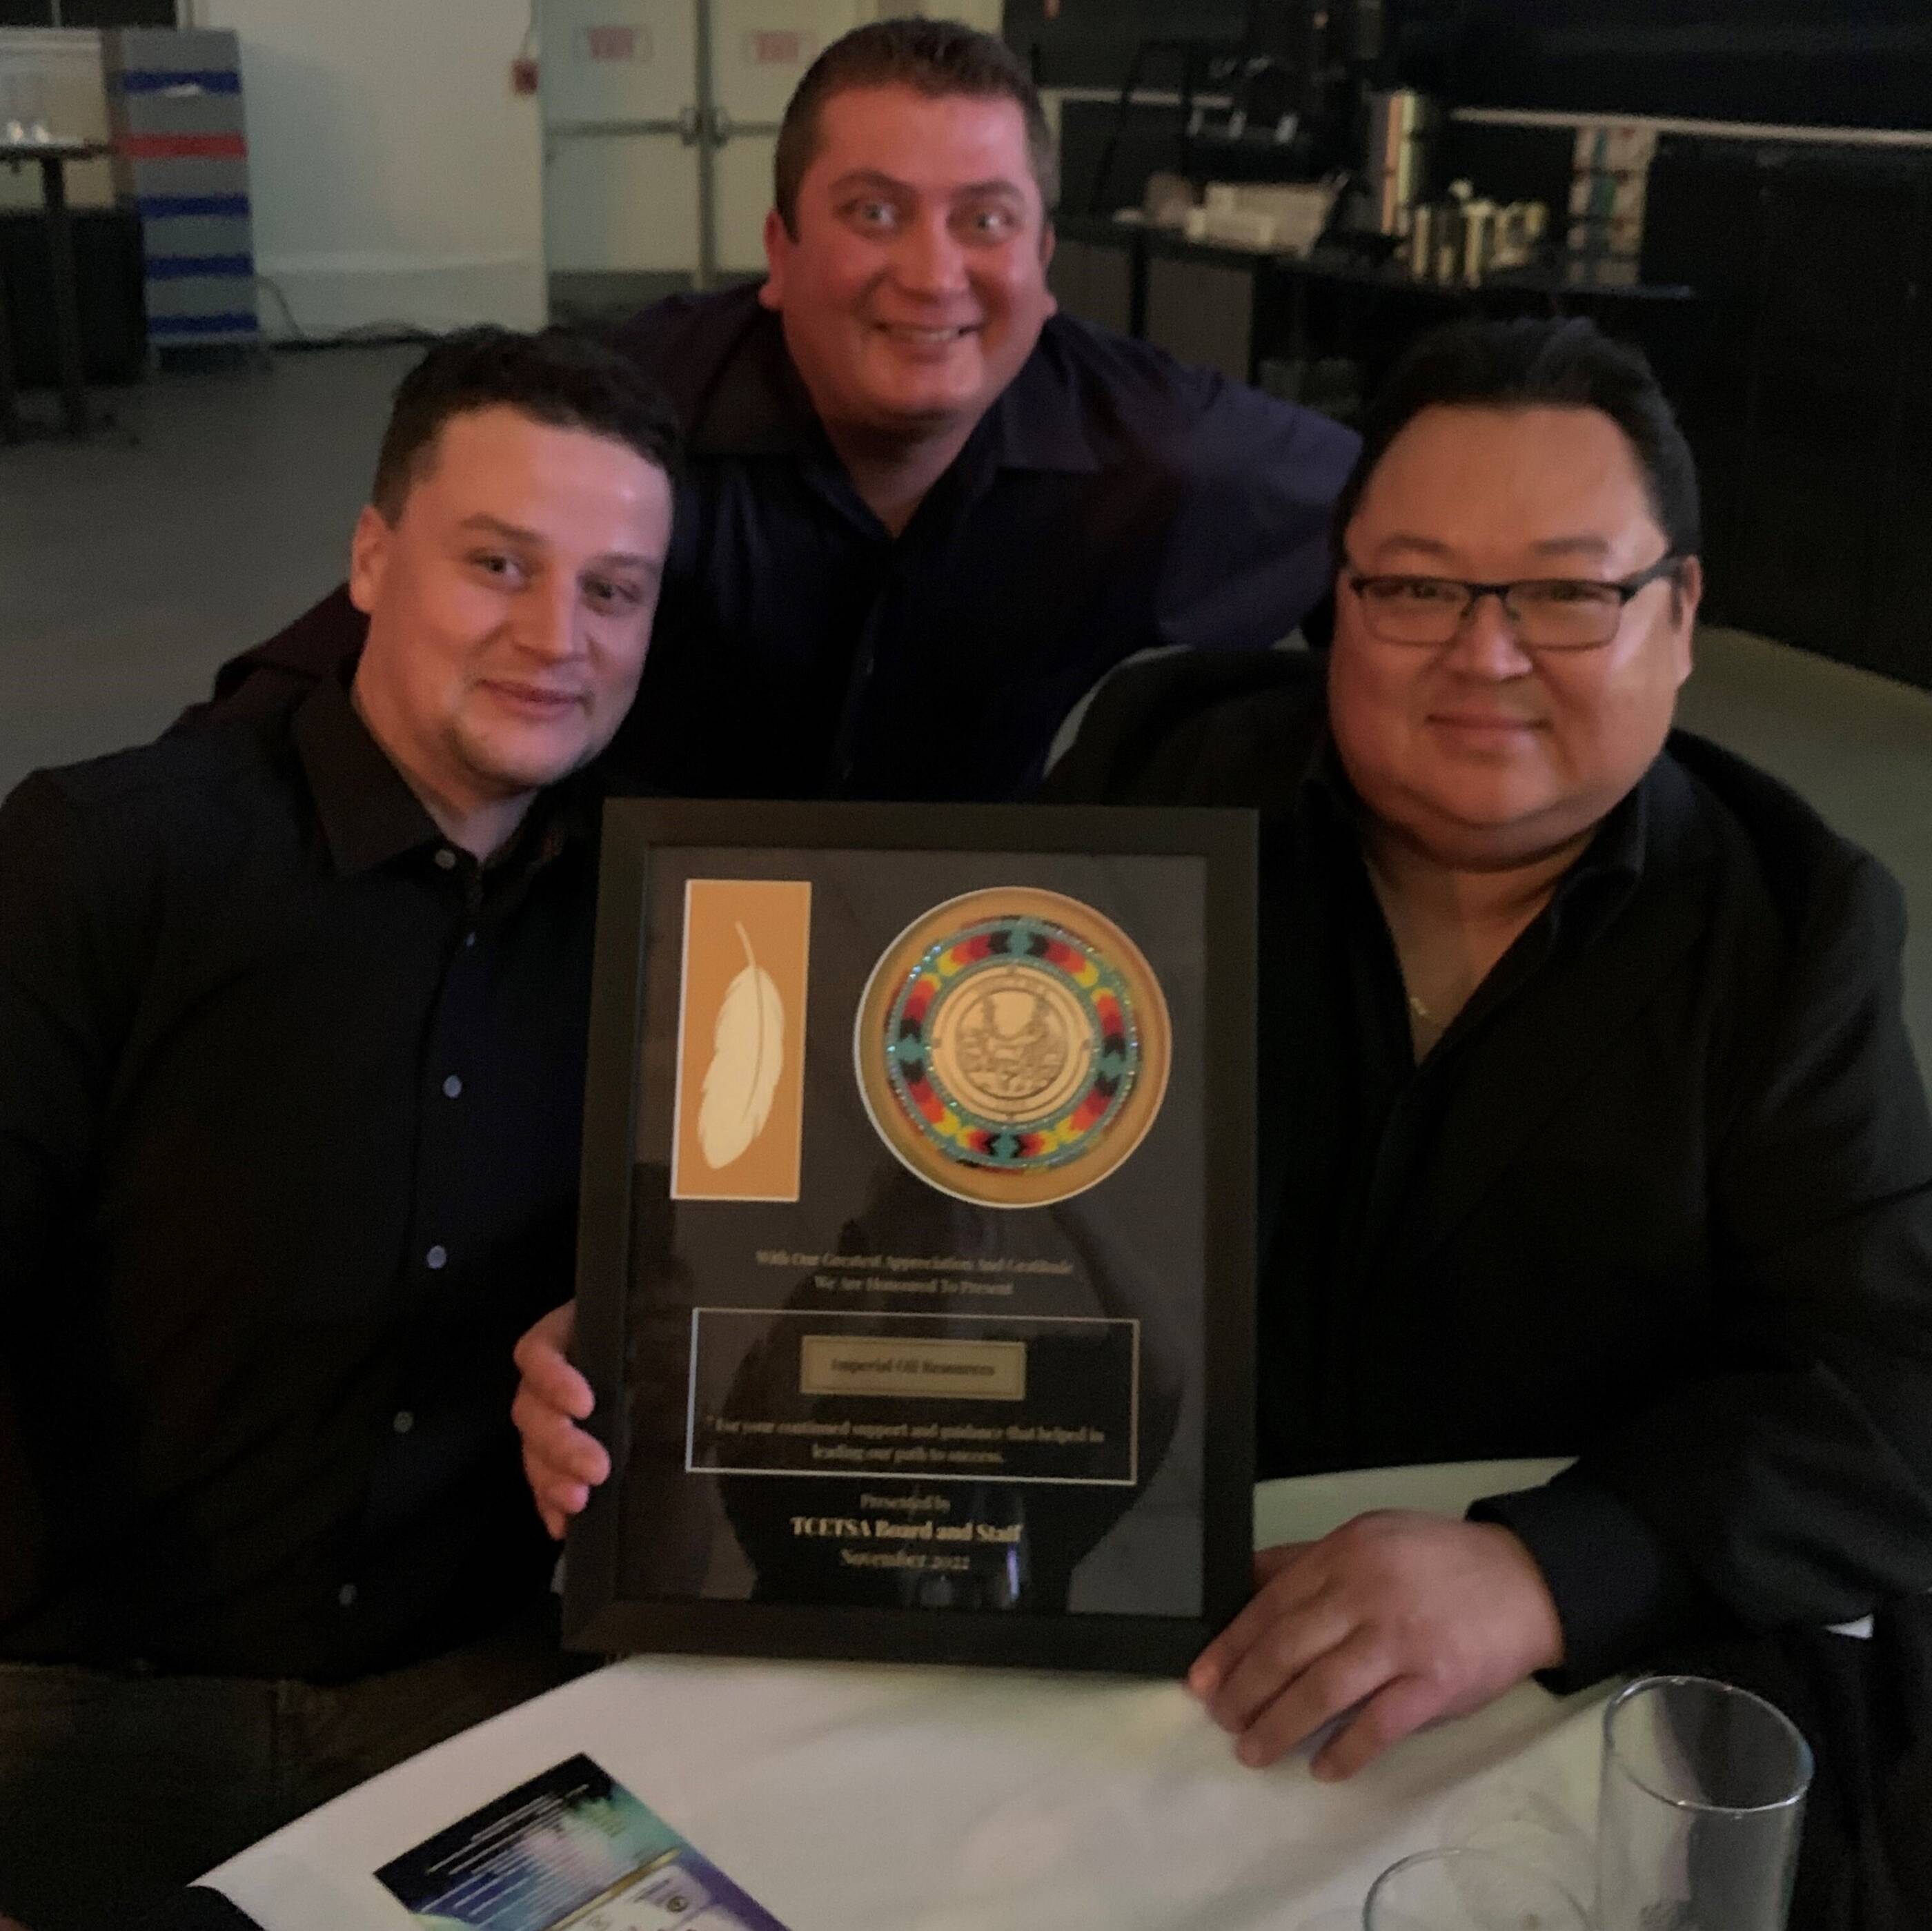 Image In November 2022, the Tribal Chiefs Employment Trainings Skills Association recognized Imperials progressive mentorship and internship programs with an award of excellence. Pictured are three members of the Cold Lake Indigenous Network, Chris Desjarlais, Barry McLaughlin and Craig Ward.